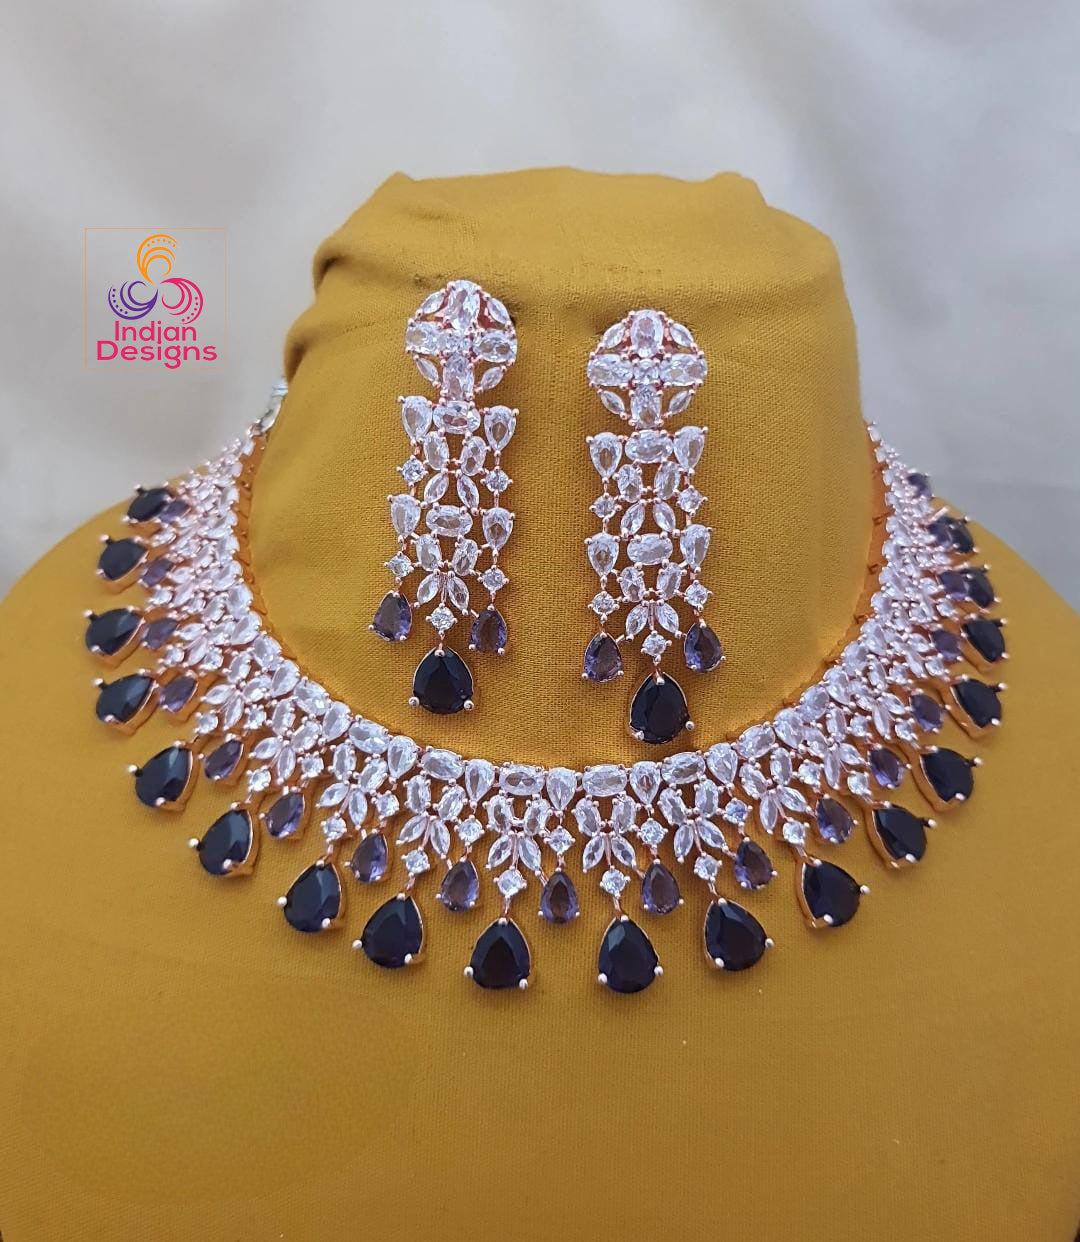 Rose gold Blue Sapphire American diamond necklace|High Quality Cz Diamonds Mint Green stone Necklace Earrings Set|Indian WeddingJewelry| Gift for her